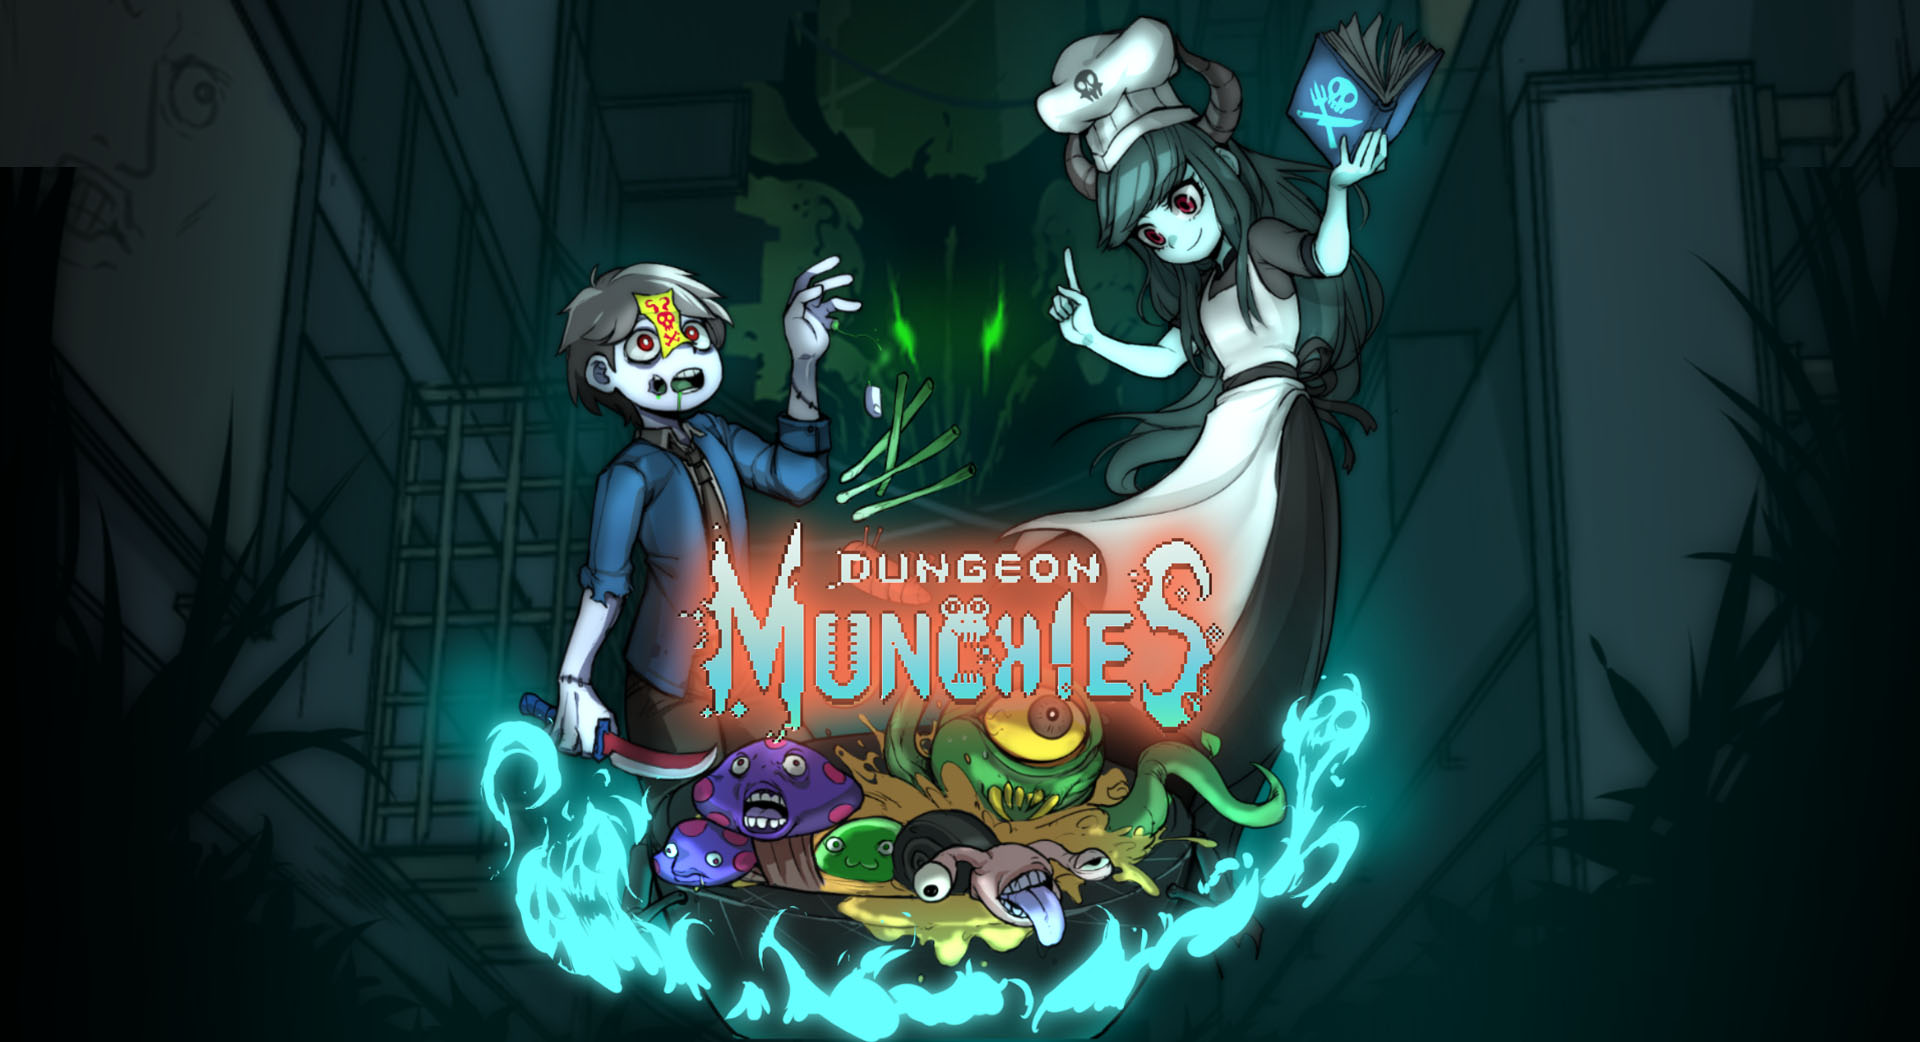 Snack on some monsters in Dungeon Munchies.